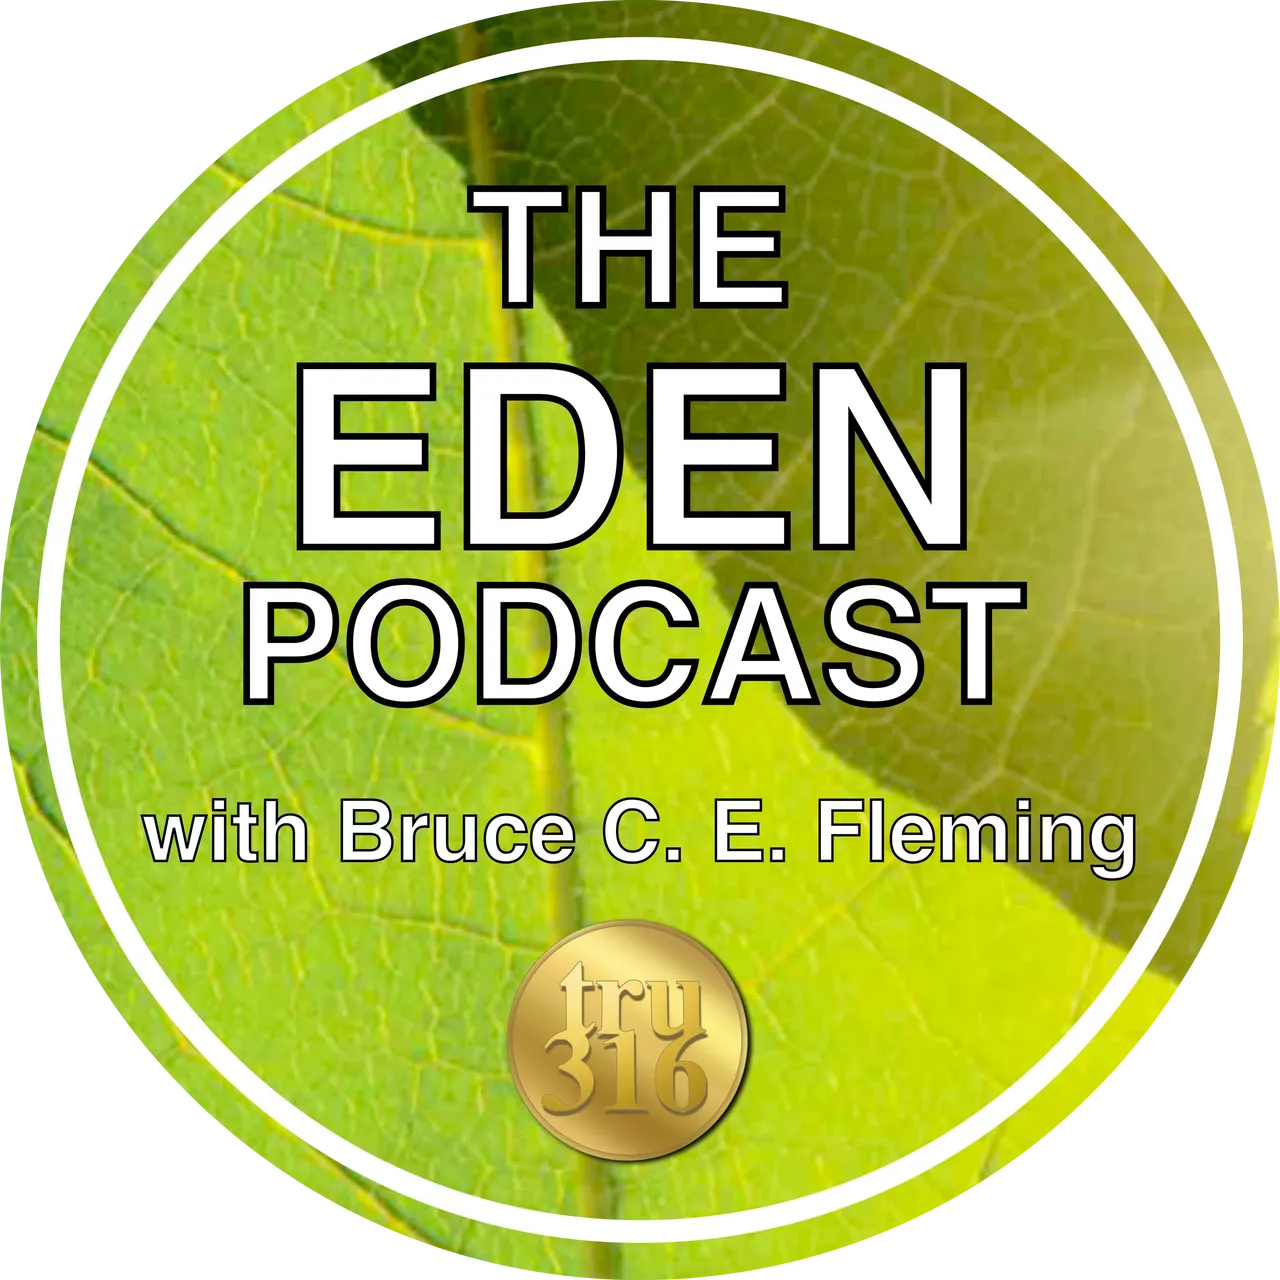 The Eden Podcast Study Guide 1. Genesis 3 16 Has Been Polluted!